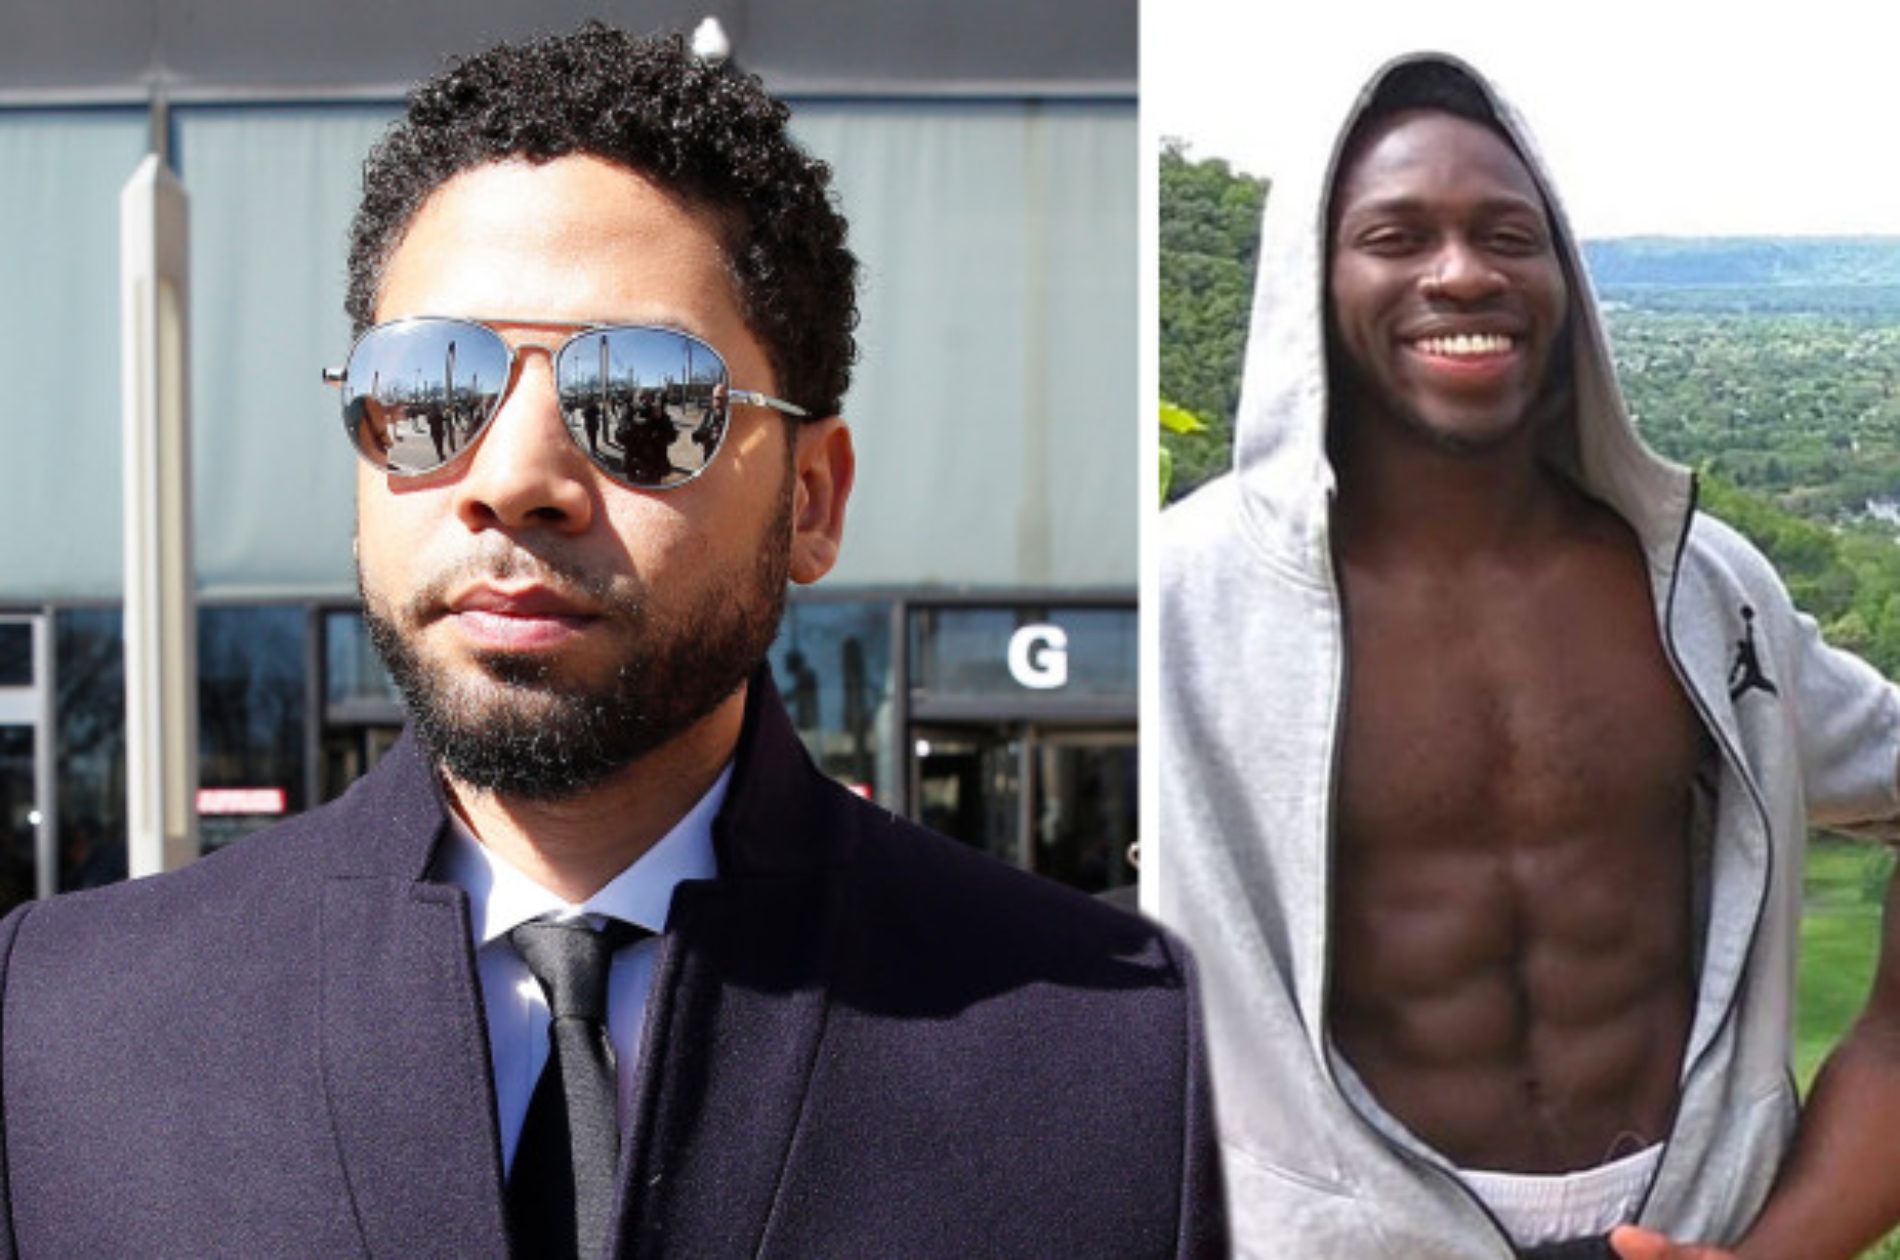 Jussie Smollett may have known and hooked up with his ‘attacker’ from a Chicago bathhouse